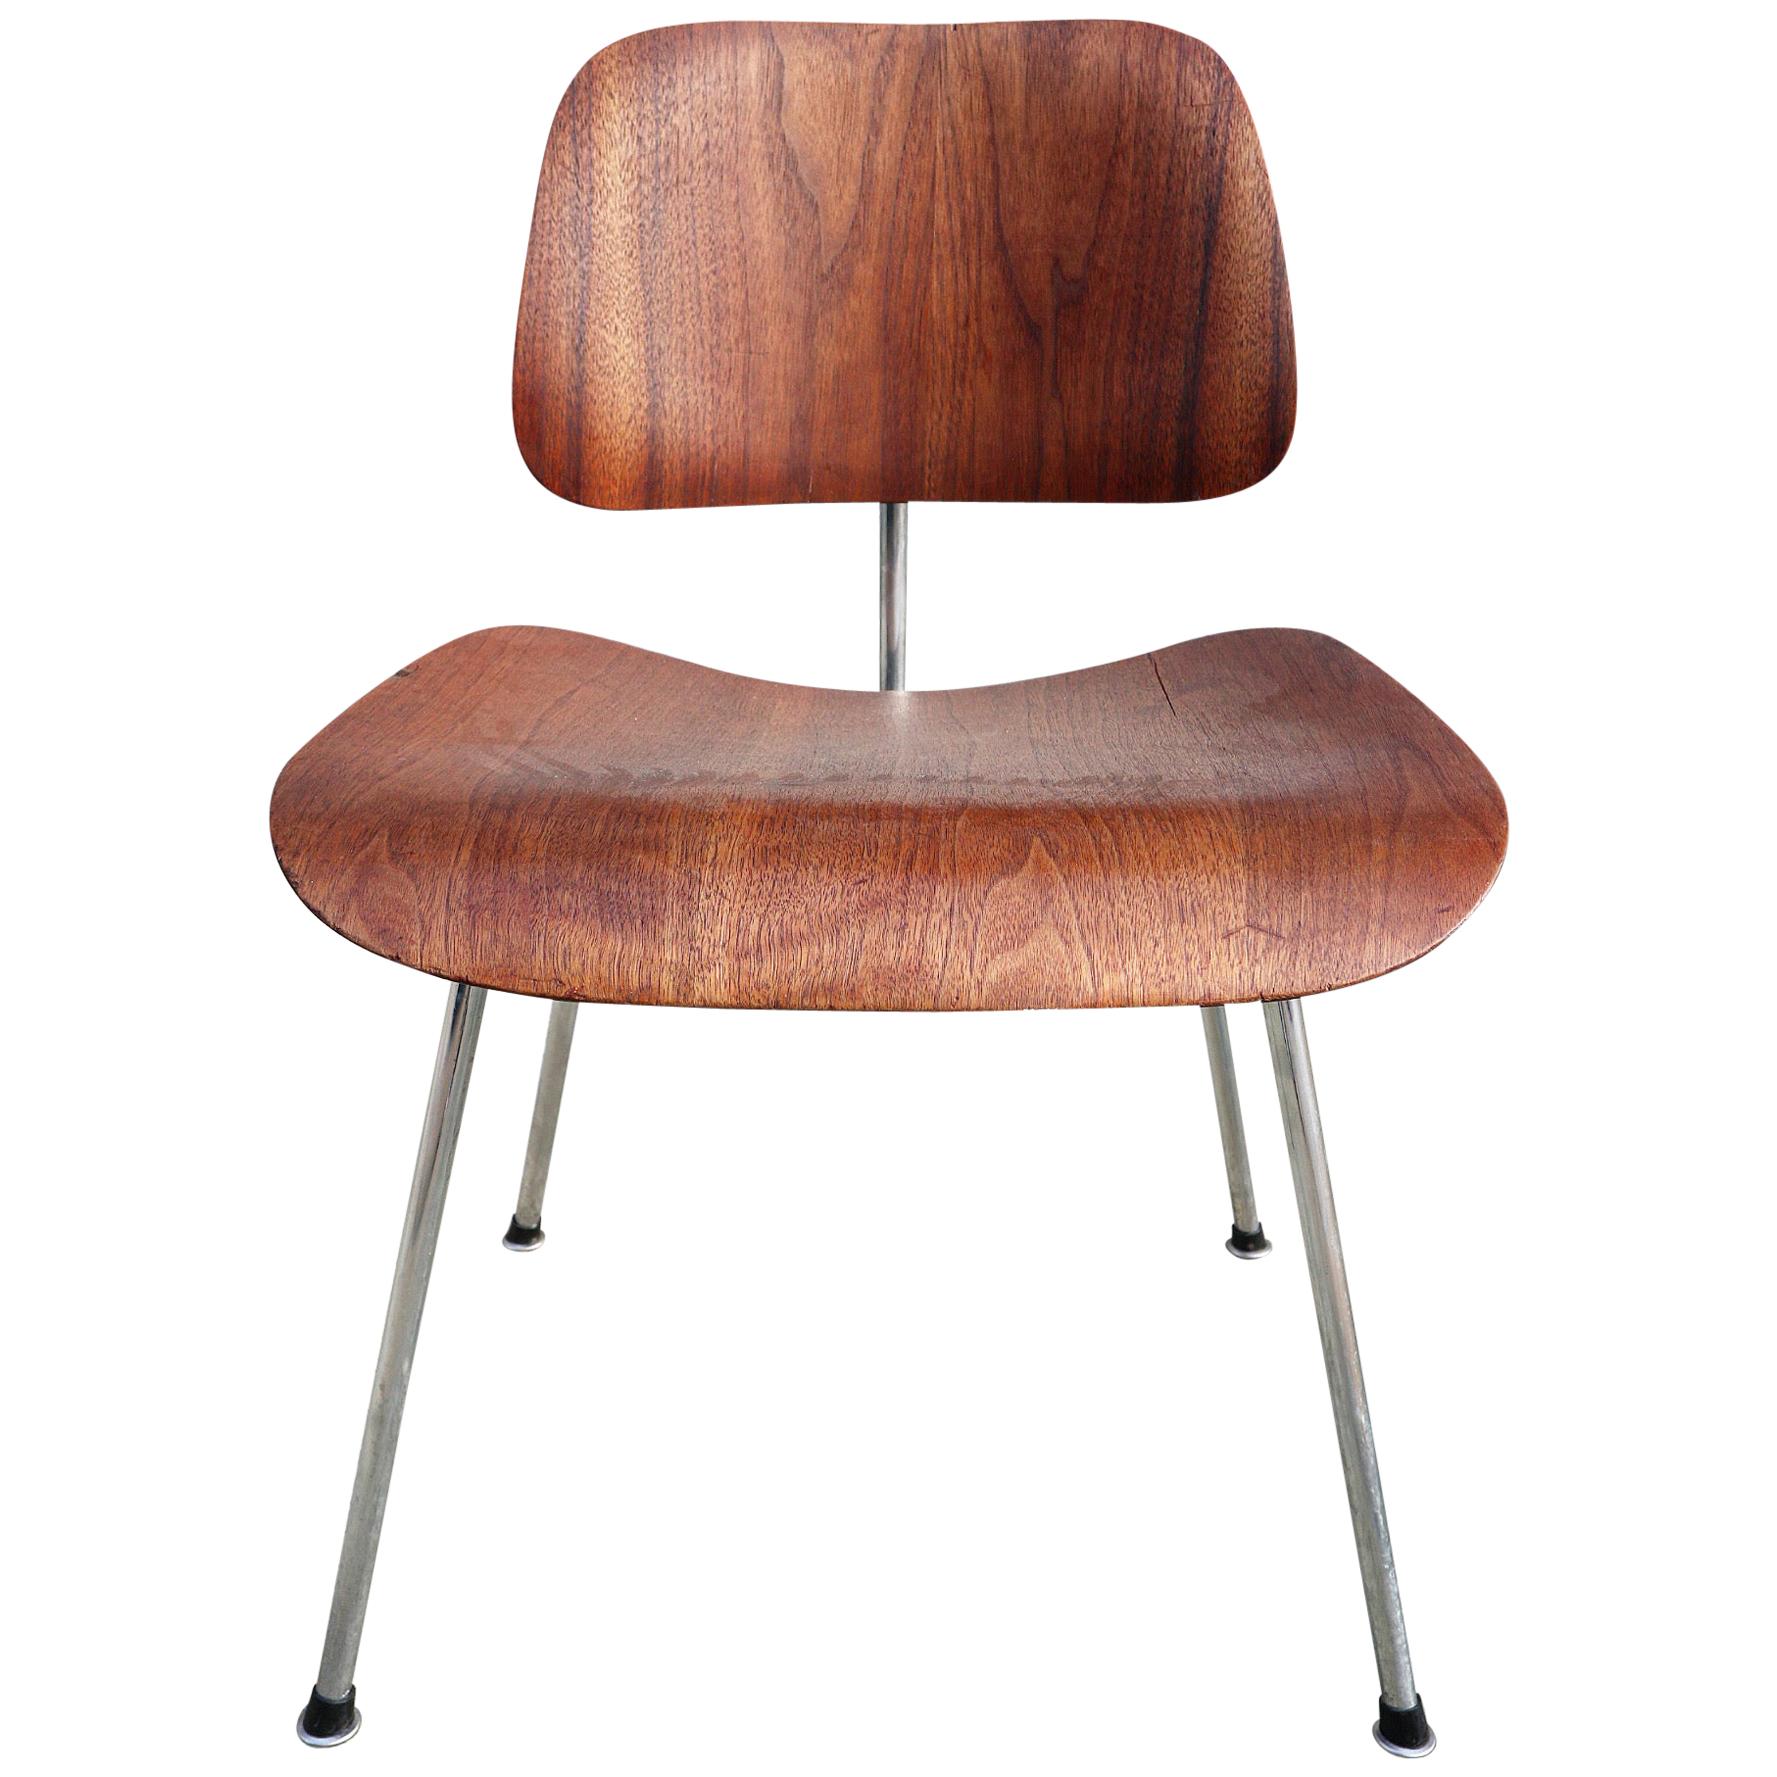 1940s Evans Edition Eames DCM Dining Chair in Walnut